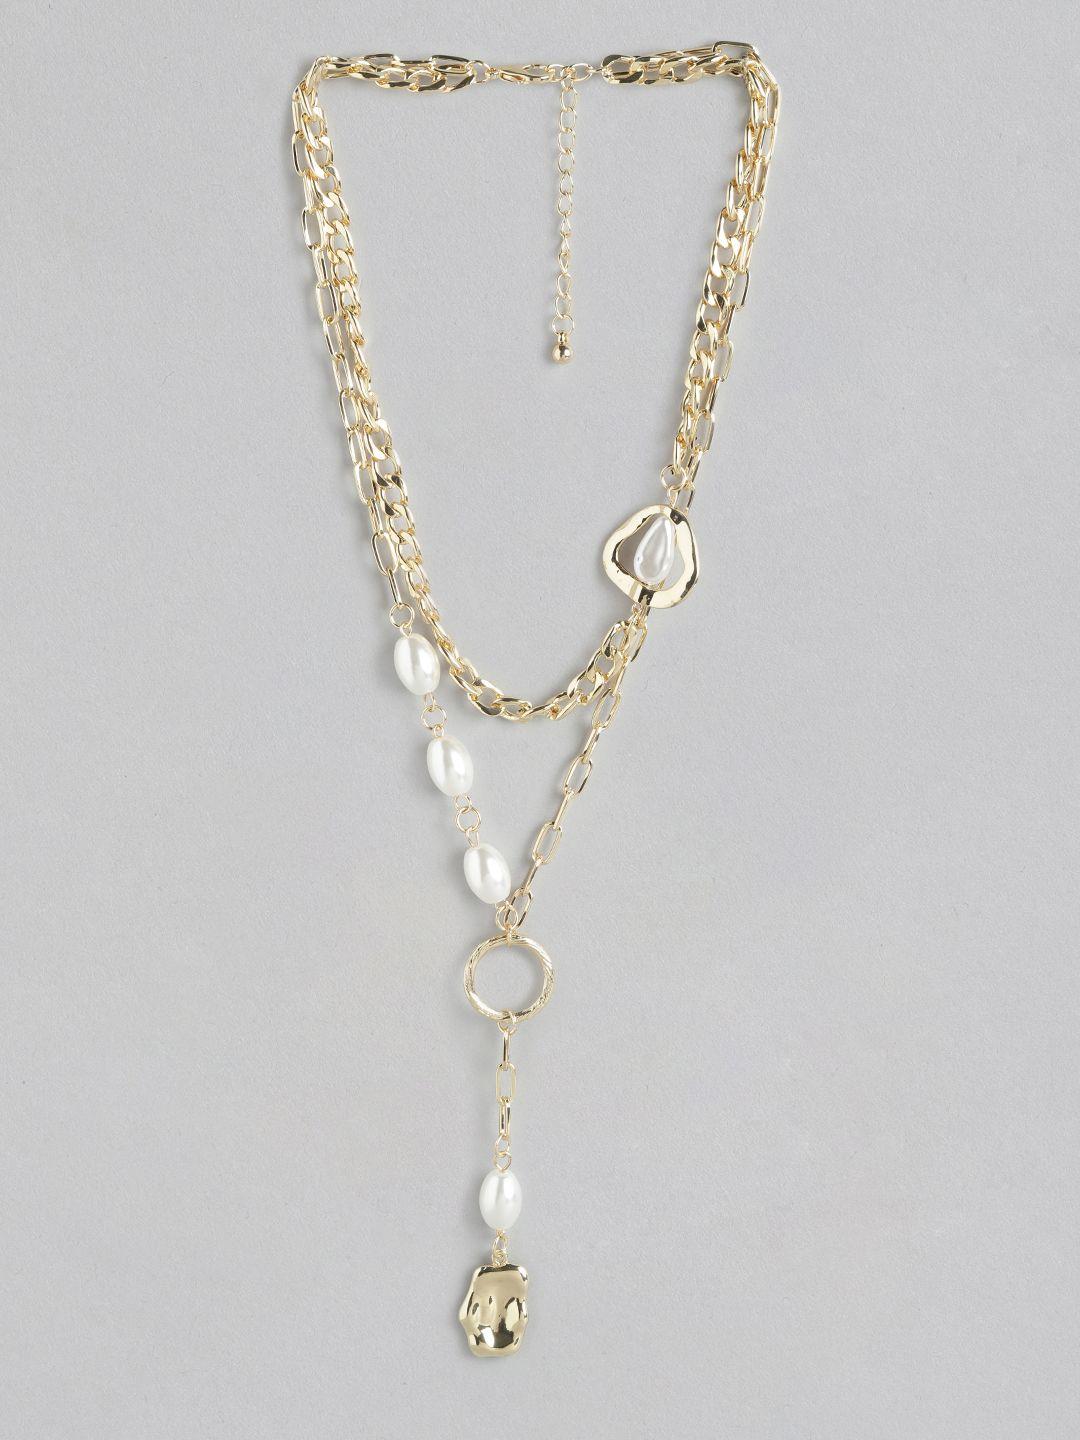 carlton london gold-plated pearls-studded necklace